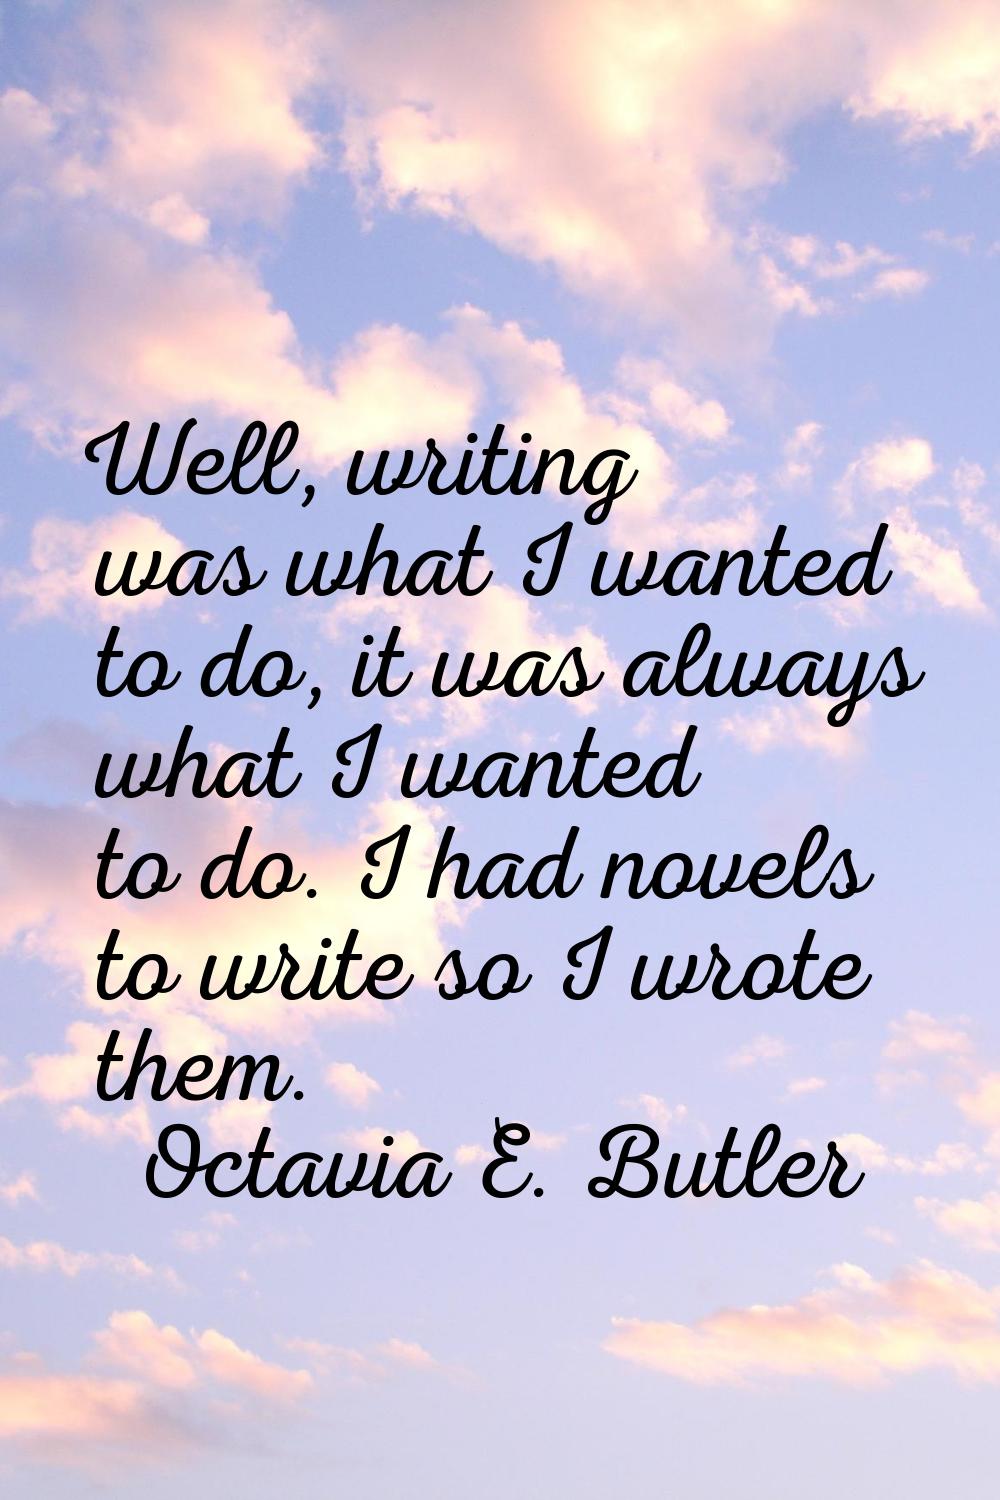 Well, writing was what I wanted to do, it was always what I wanted to do. I had novels to write so 